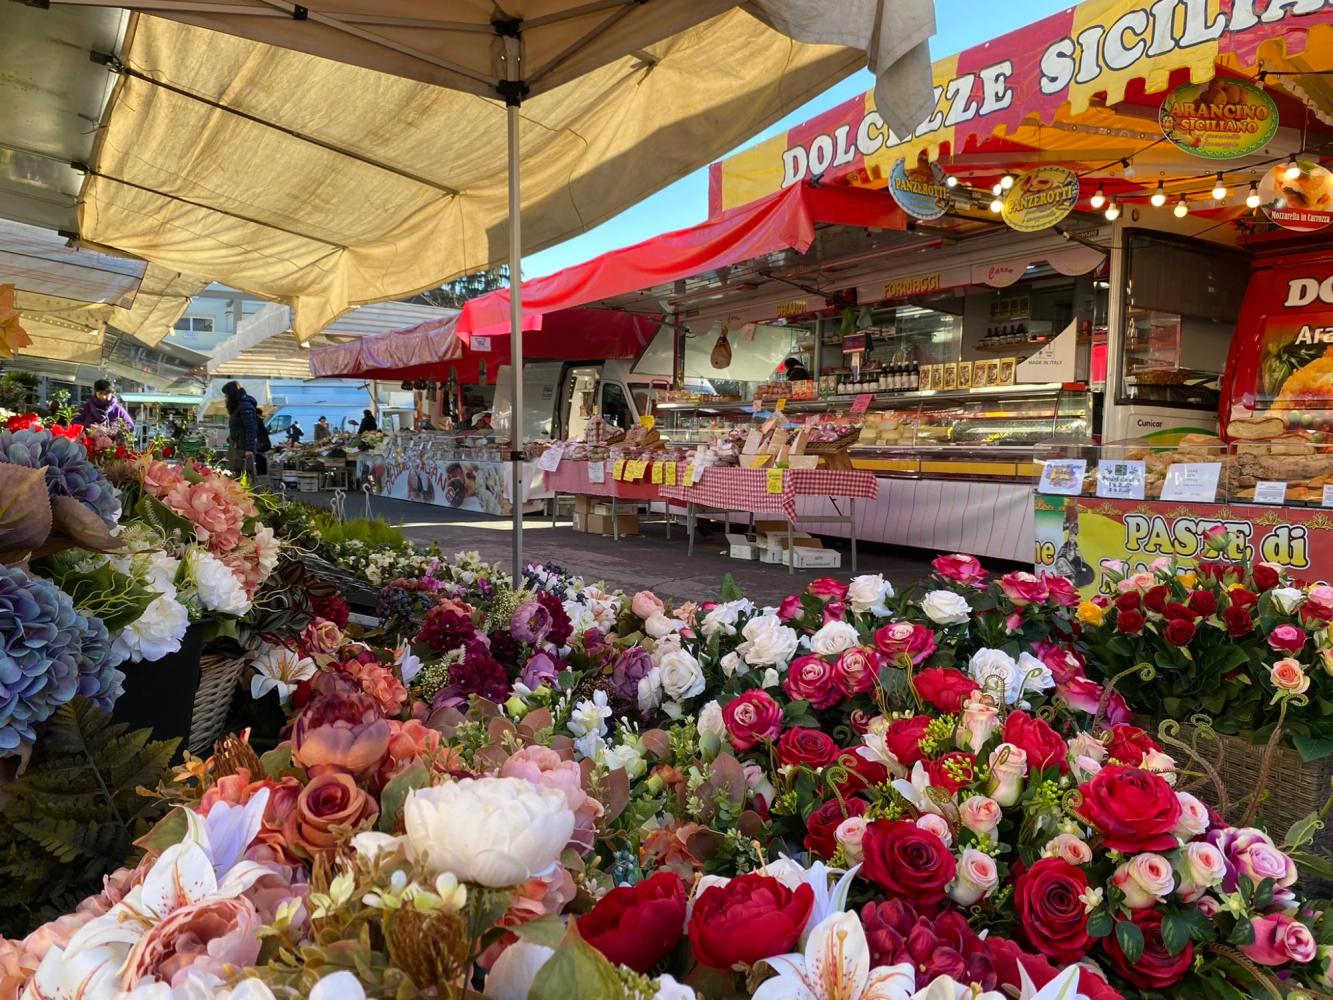 Flower stalls for sale at the Luino market